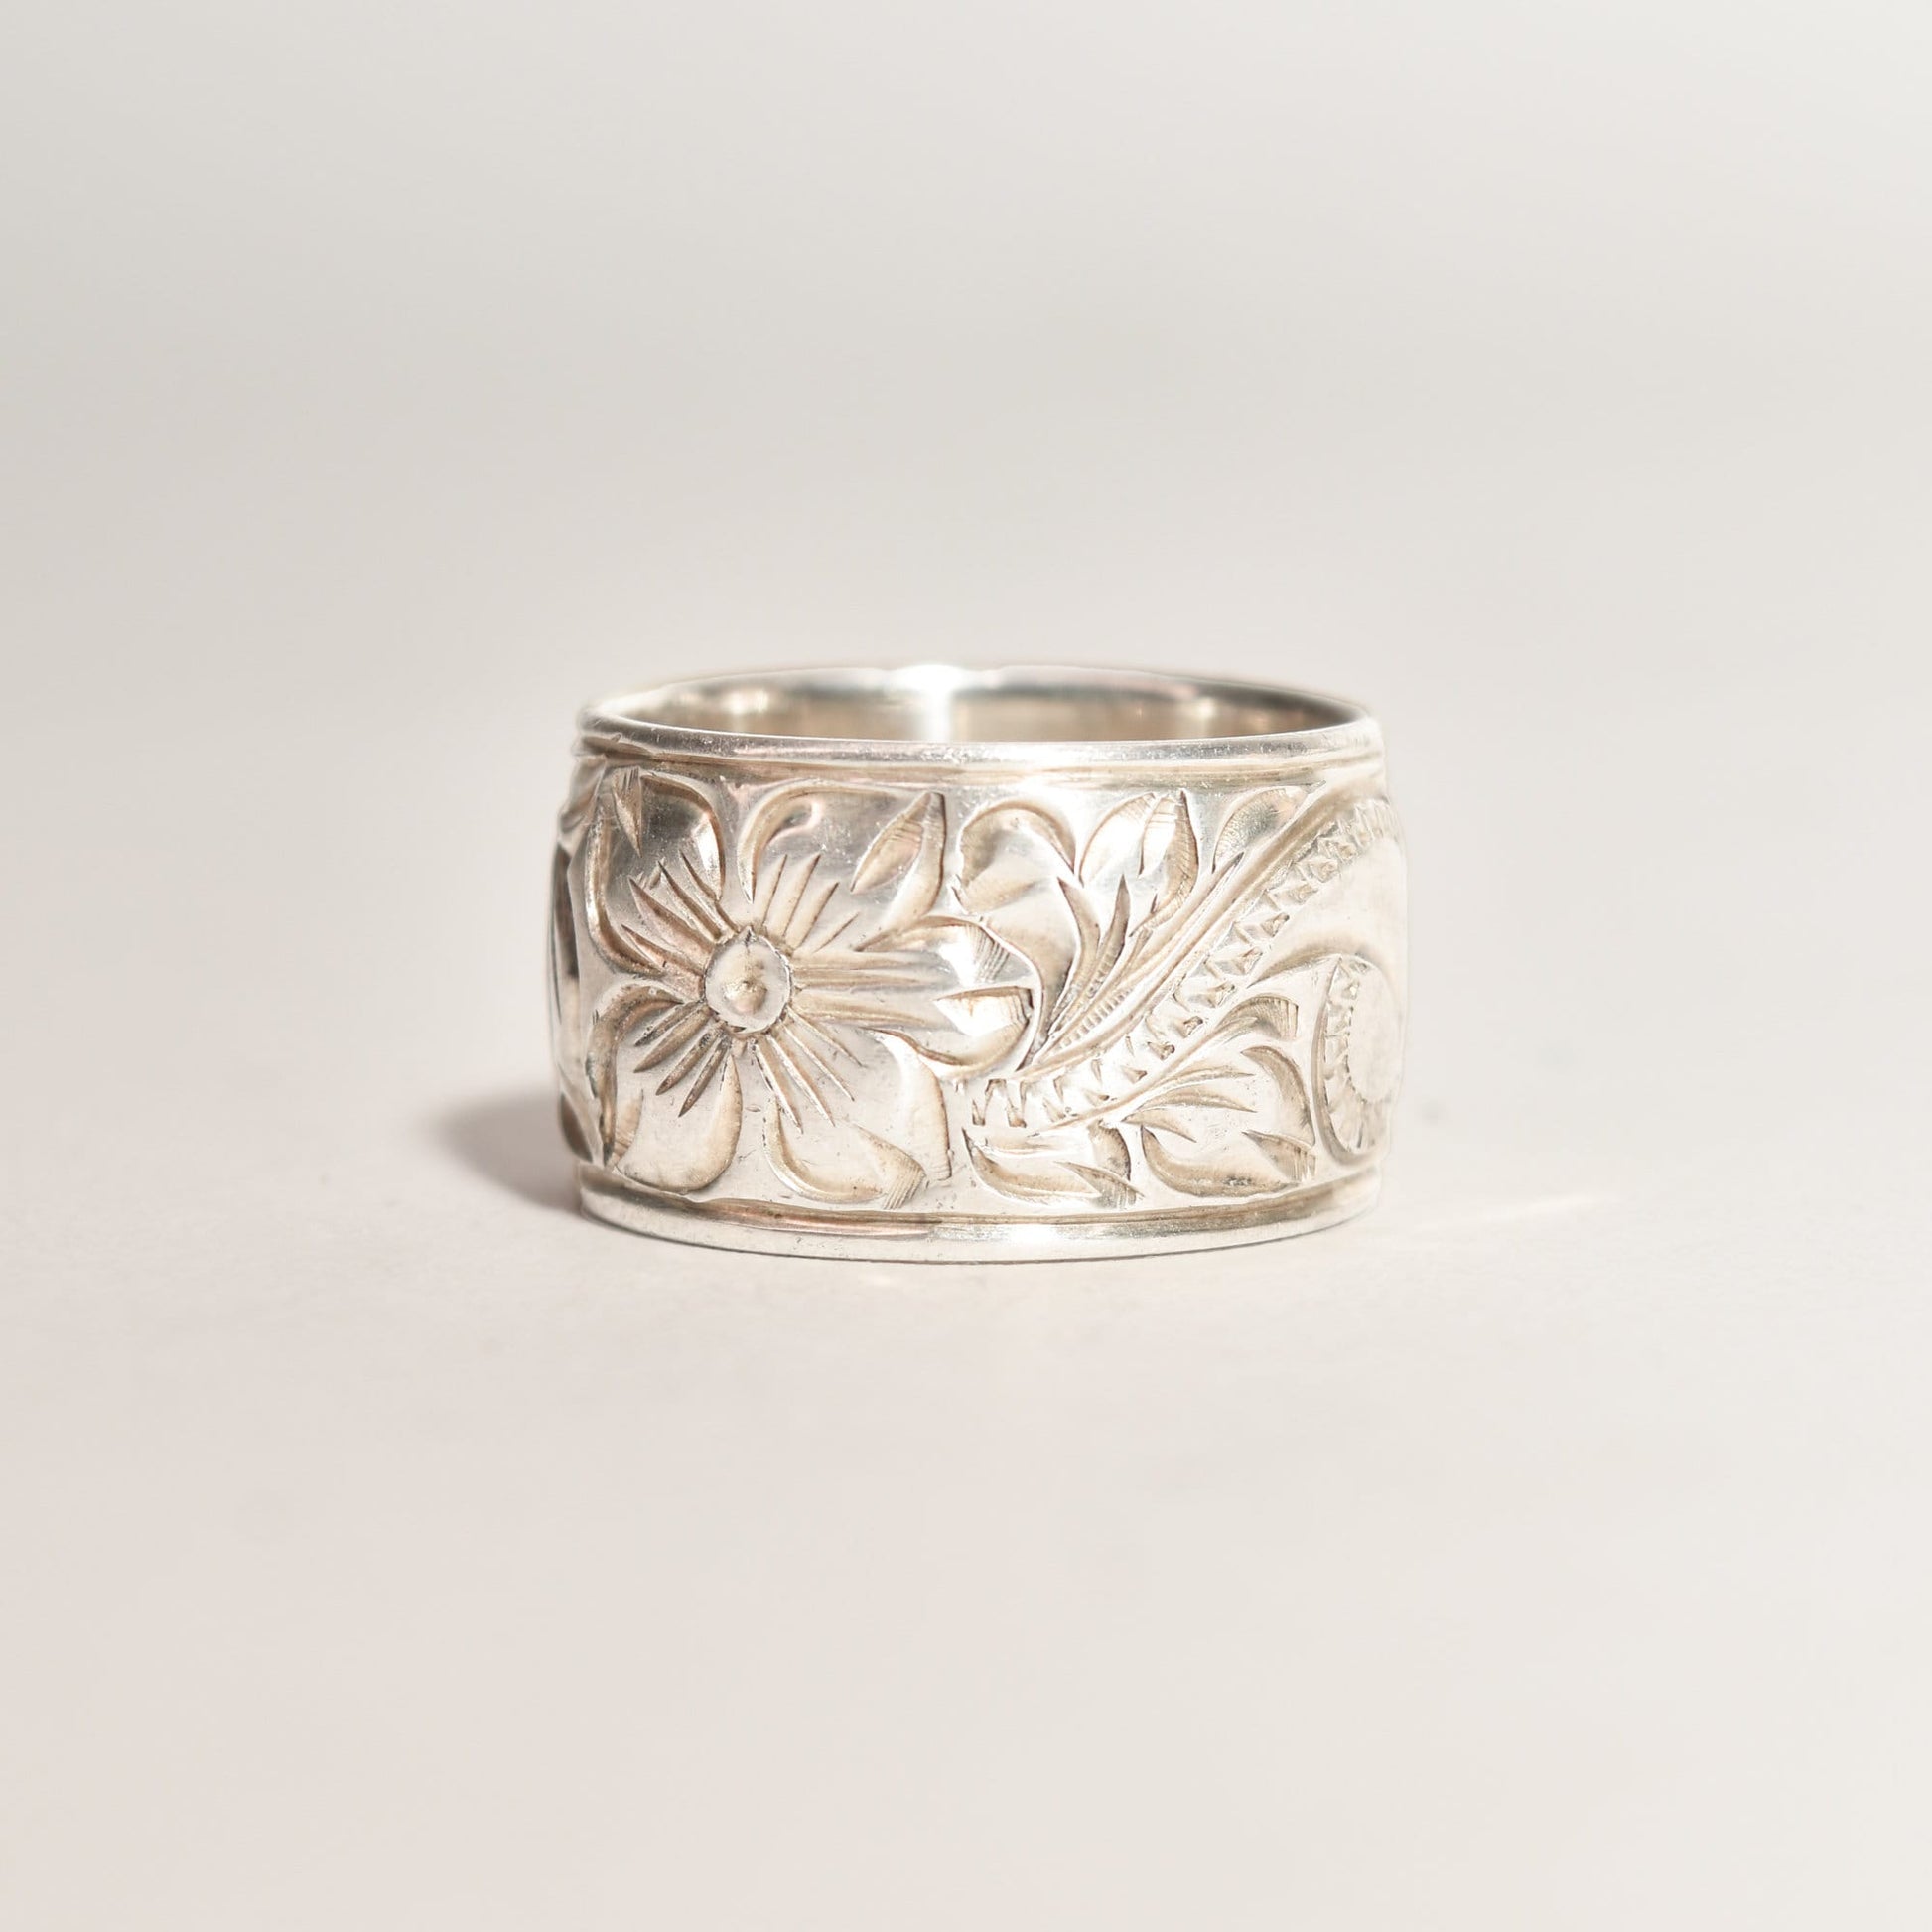 Floral engraved sterling silver band ring, 11.5mm wide, Art Nouveau revival style, size 6 US, displayed on a neutral background.